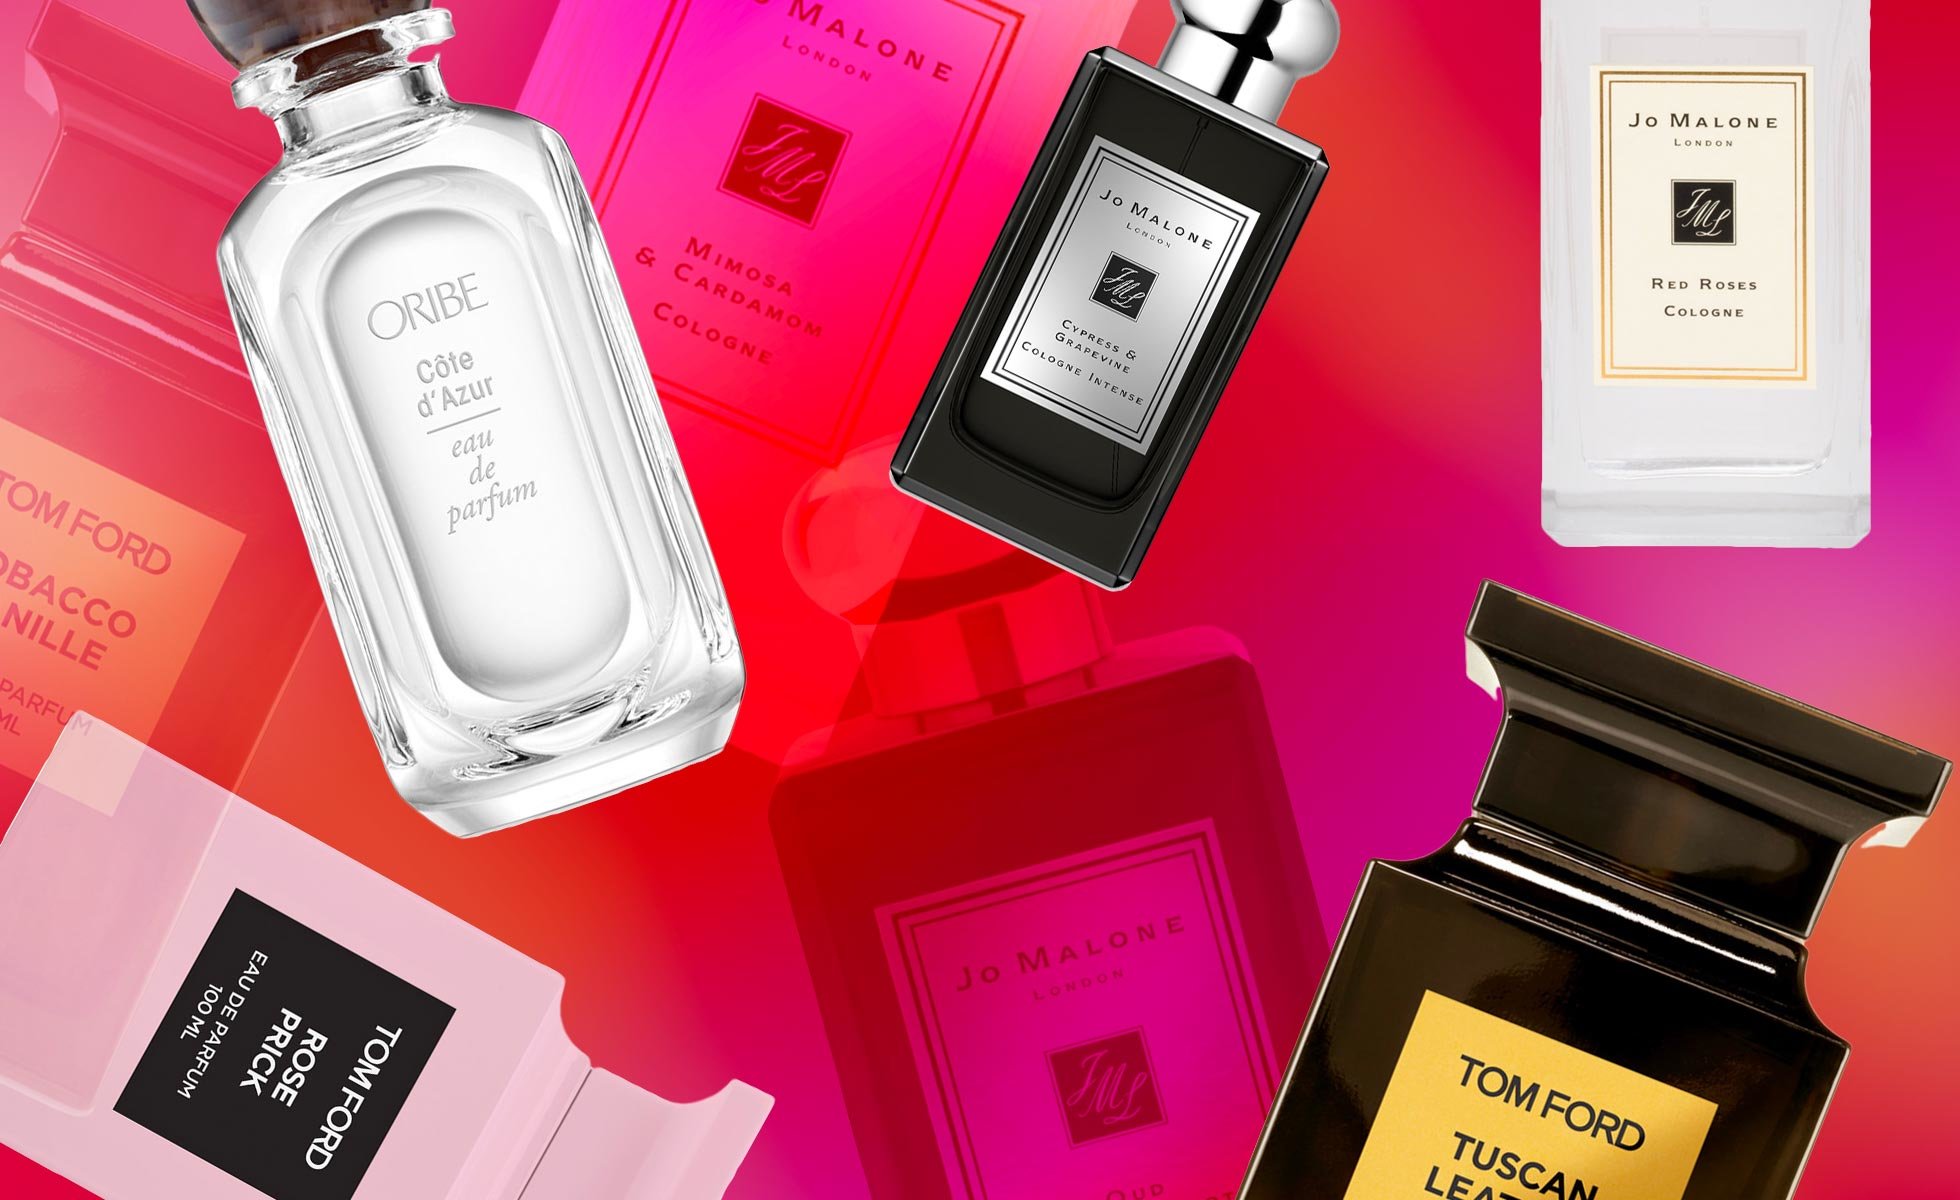 A Valentine's Day Fragrance Gift Guide to Add to Their Cologne